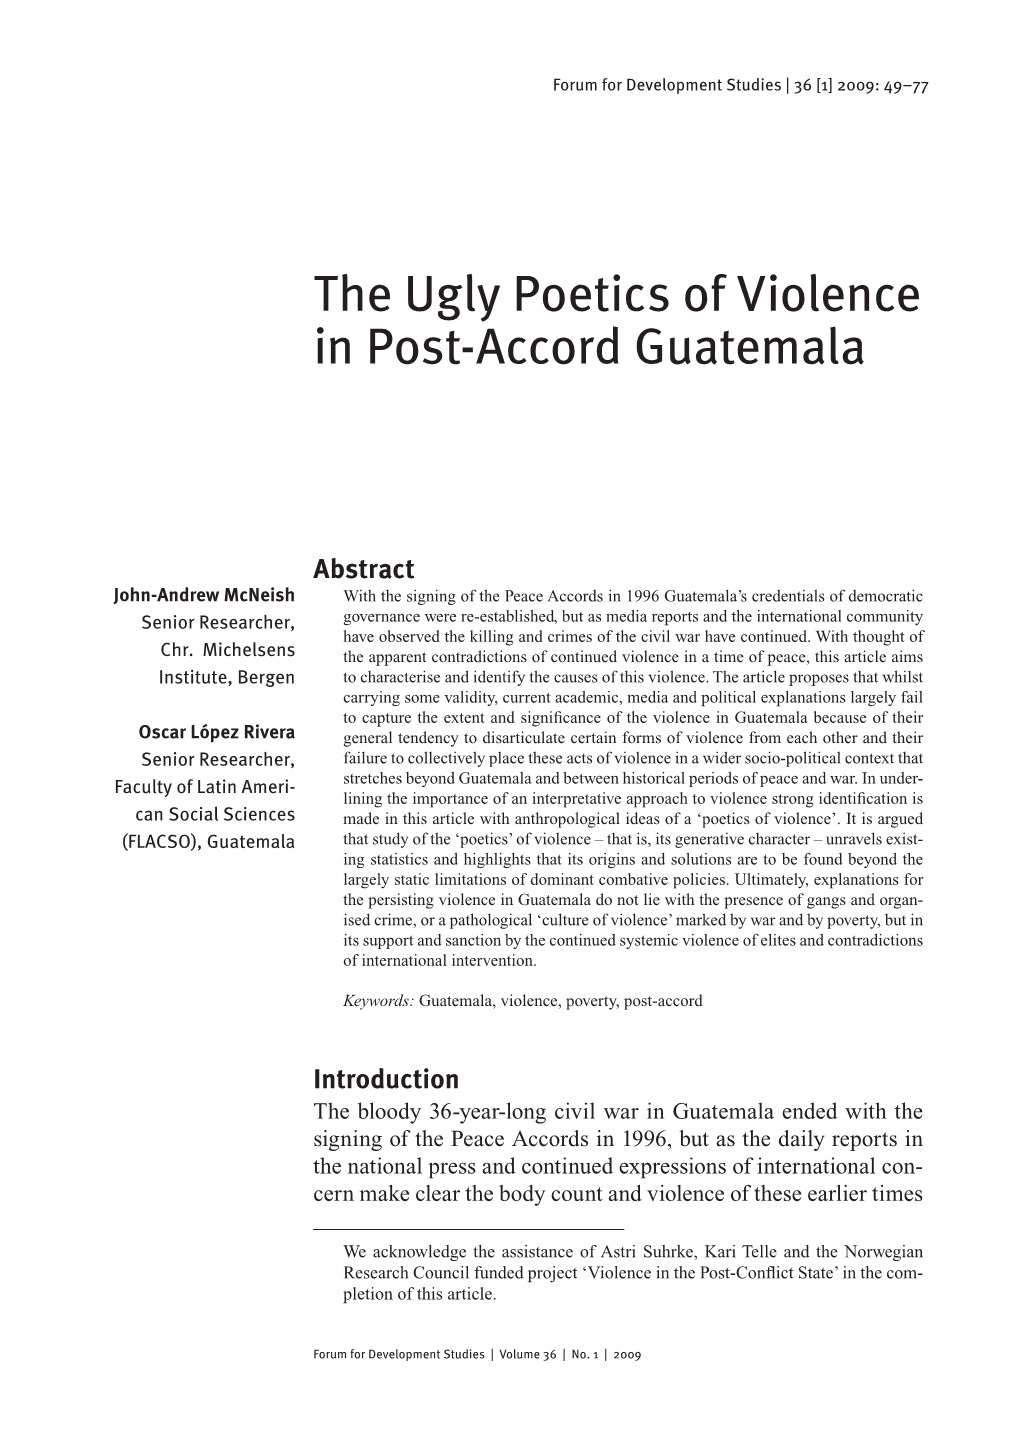 The Ugly Poetics of Violence in Post-Accord Guatemala